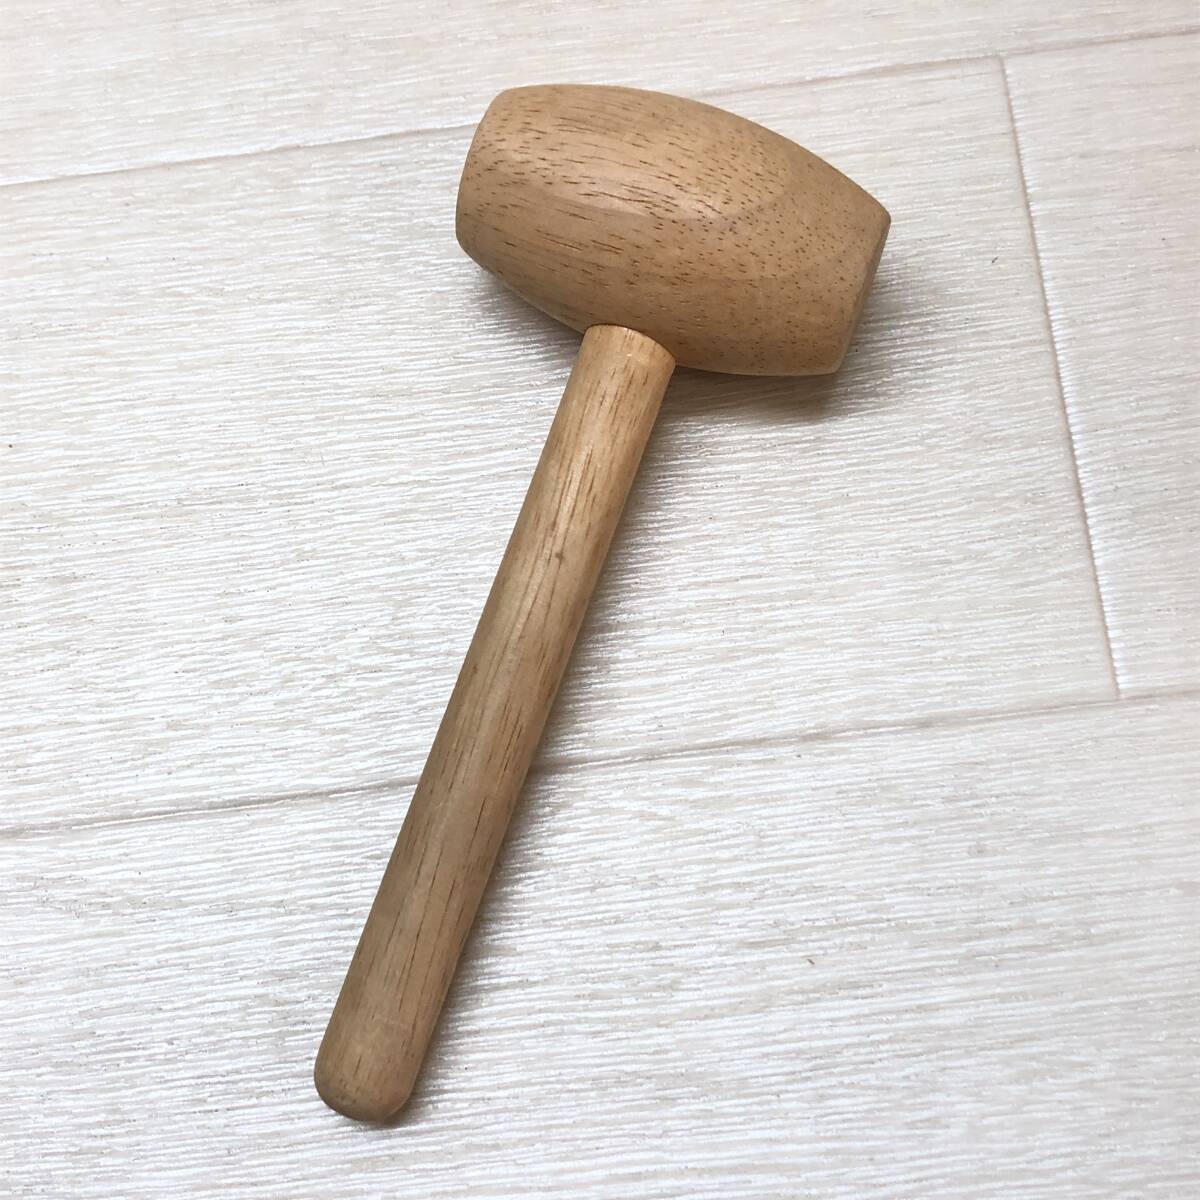 !PLANTOYS plan toy 53480 HammerBalls Hammer ball wooden toy intellectual training toy playing Kids baby box attaching secondhand goods!G23071